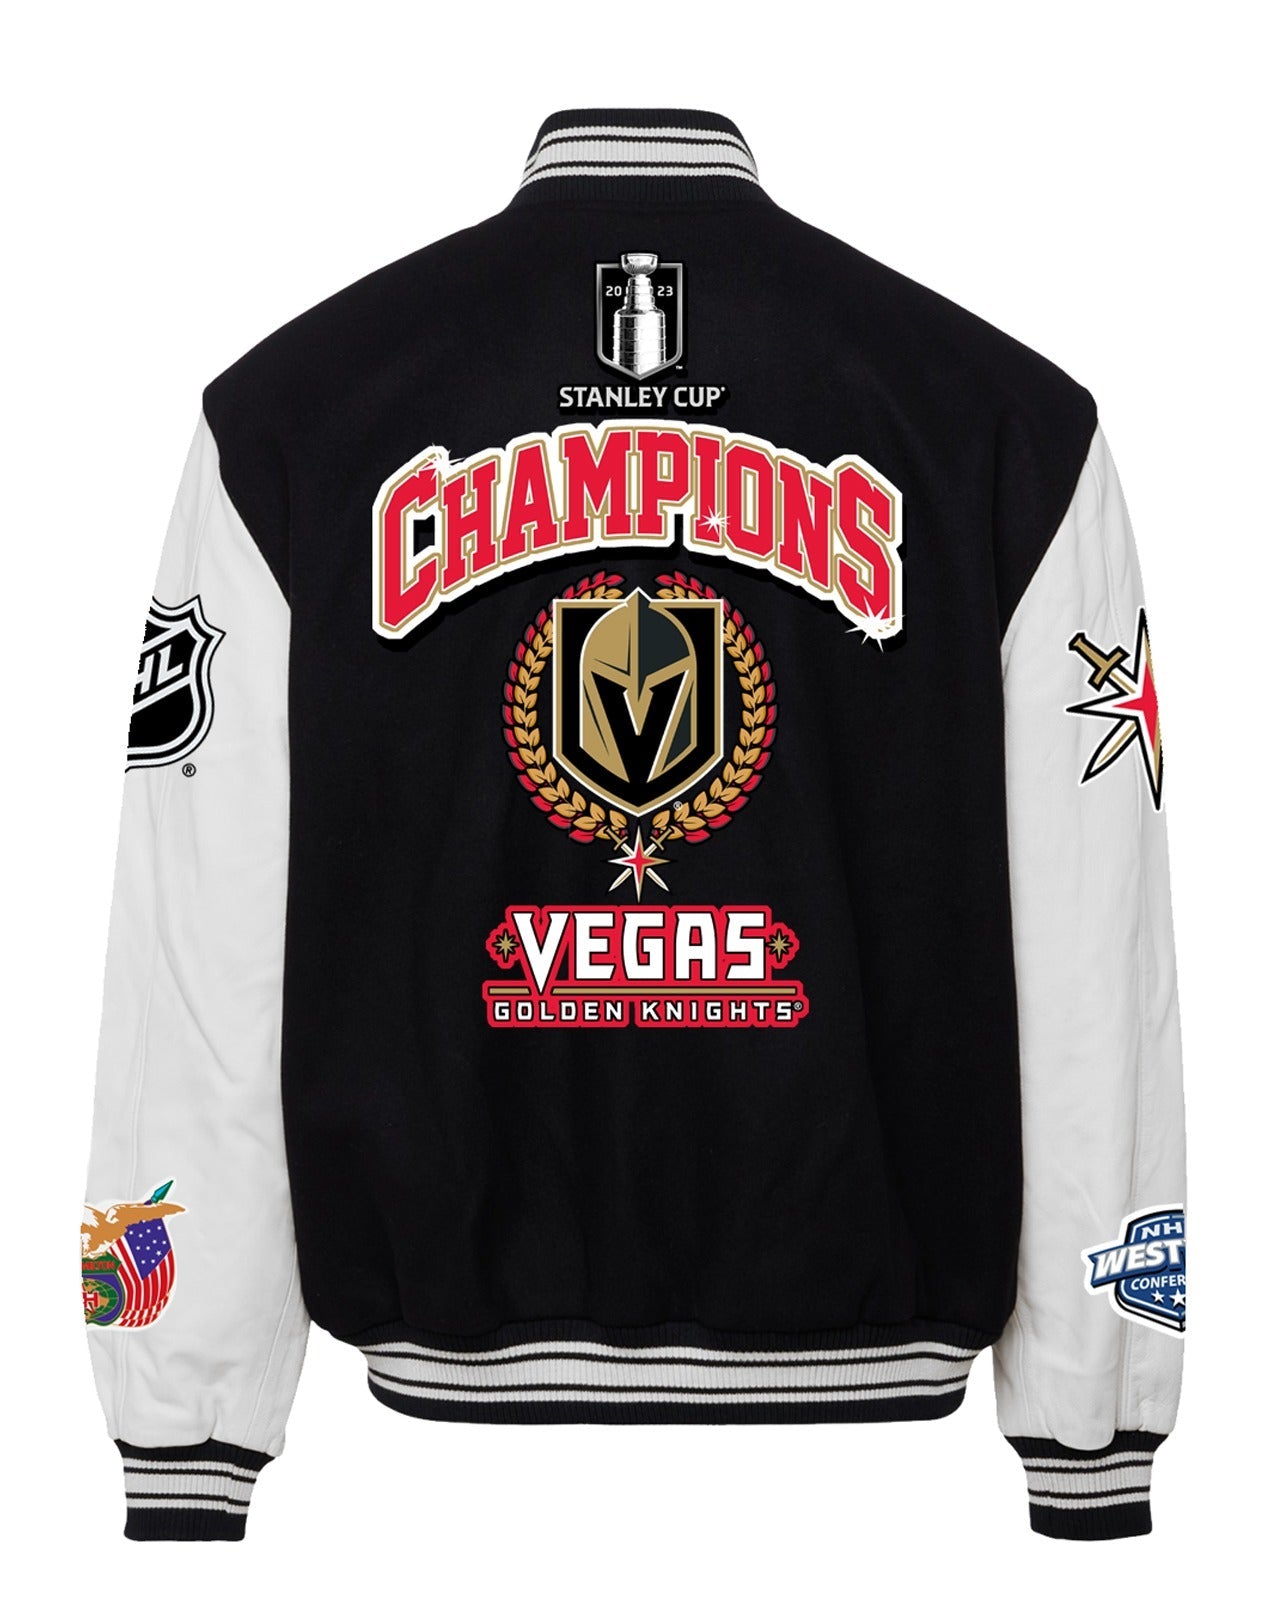 VEGAS GOLDEN KNIGHTS NHL STANLEY CUP CHAMPIONS WOOL & LEATHER VARSITY JACKET BLACK/WHITE